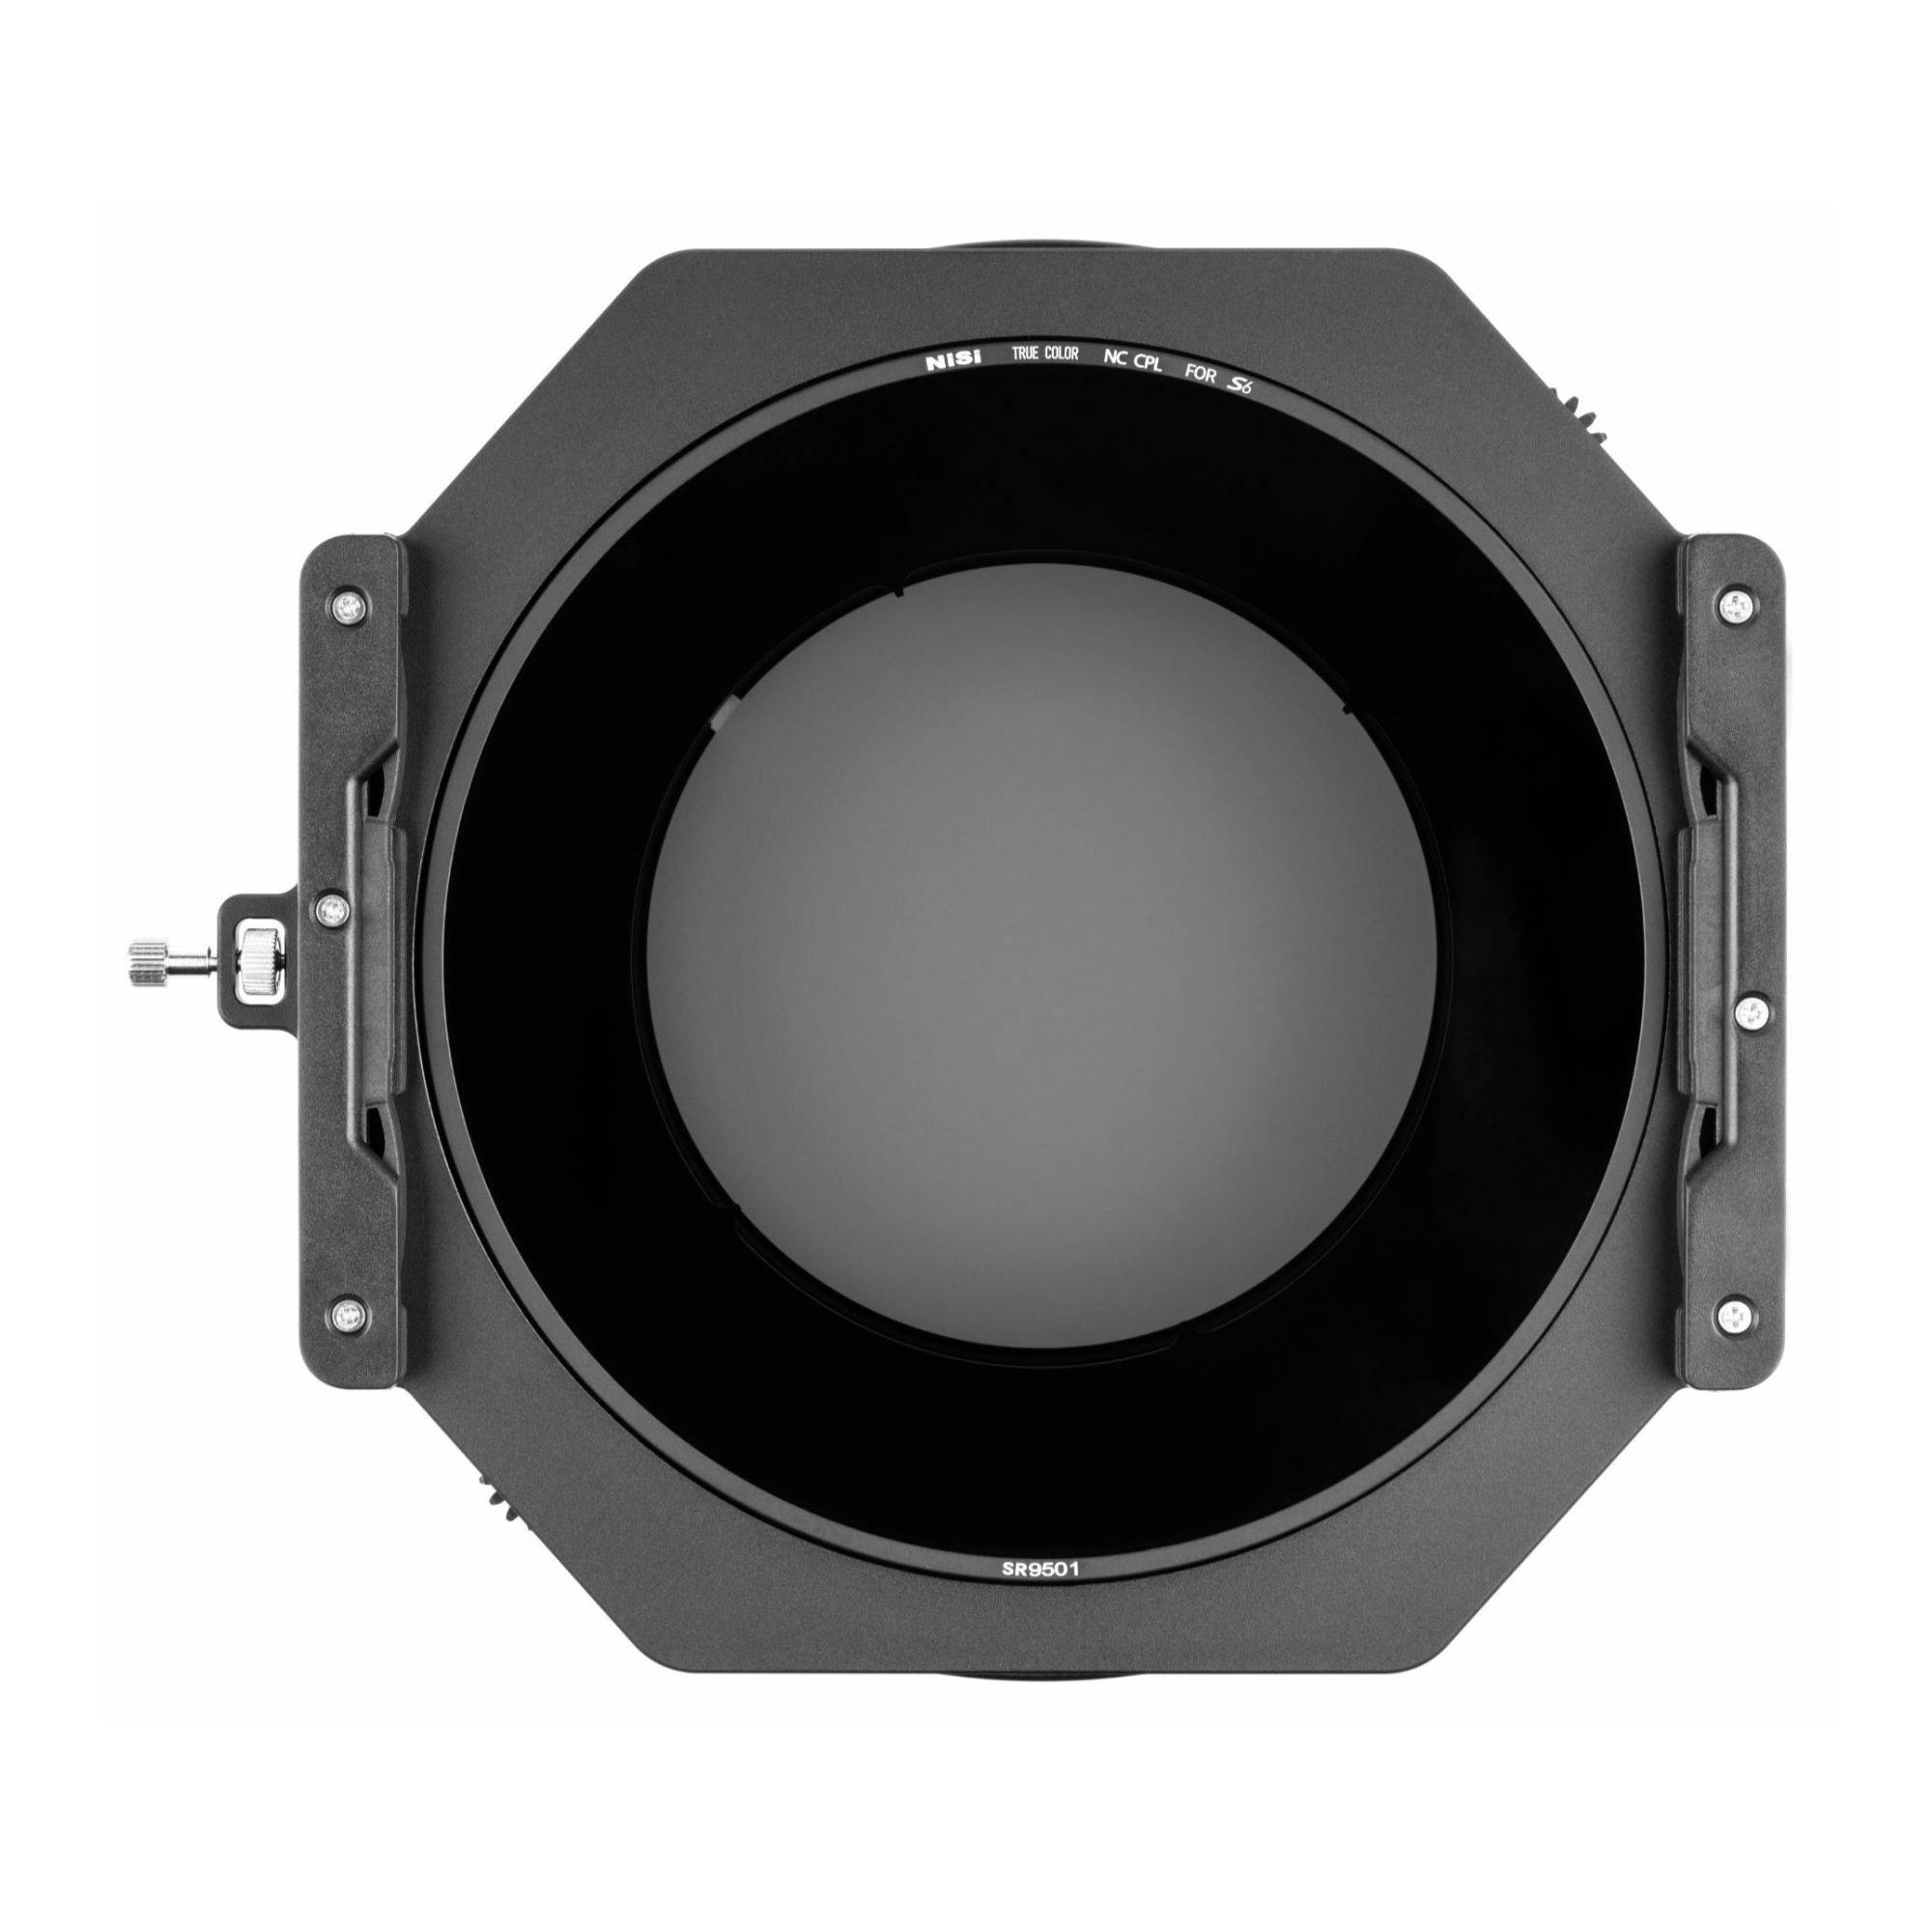 NiSi S6 150mm Filter Holder Kit with True Color NC CPL for Sigma 14-24mm f/2.8 DG DN Art